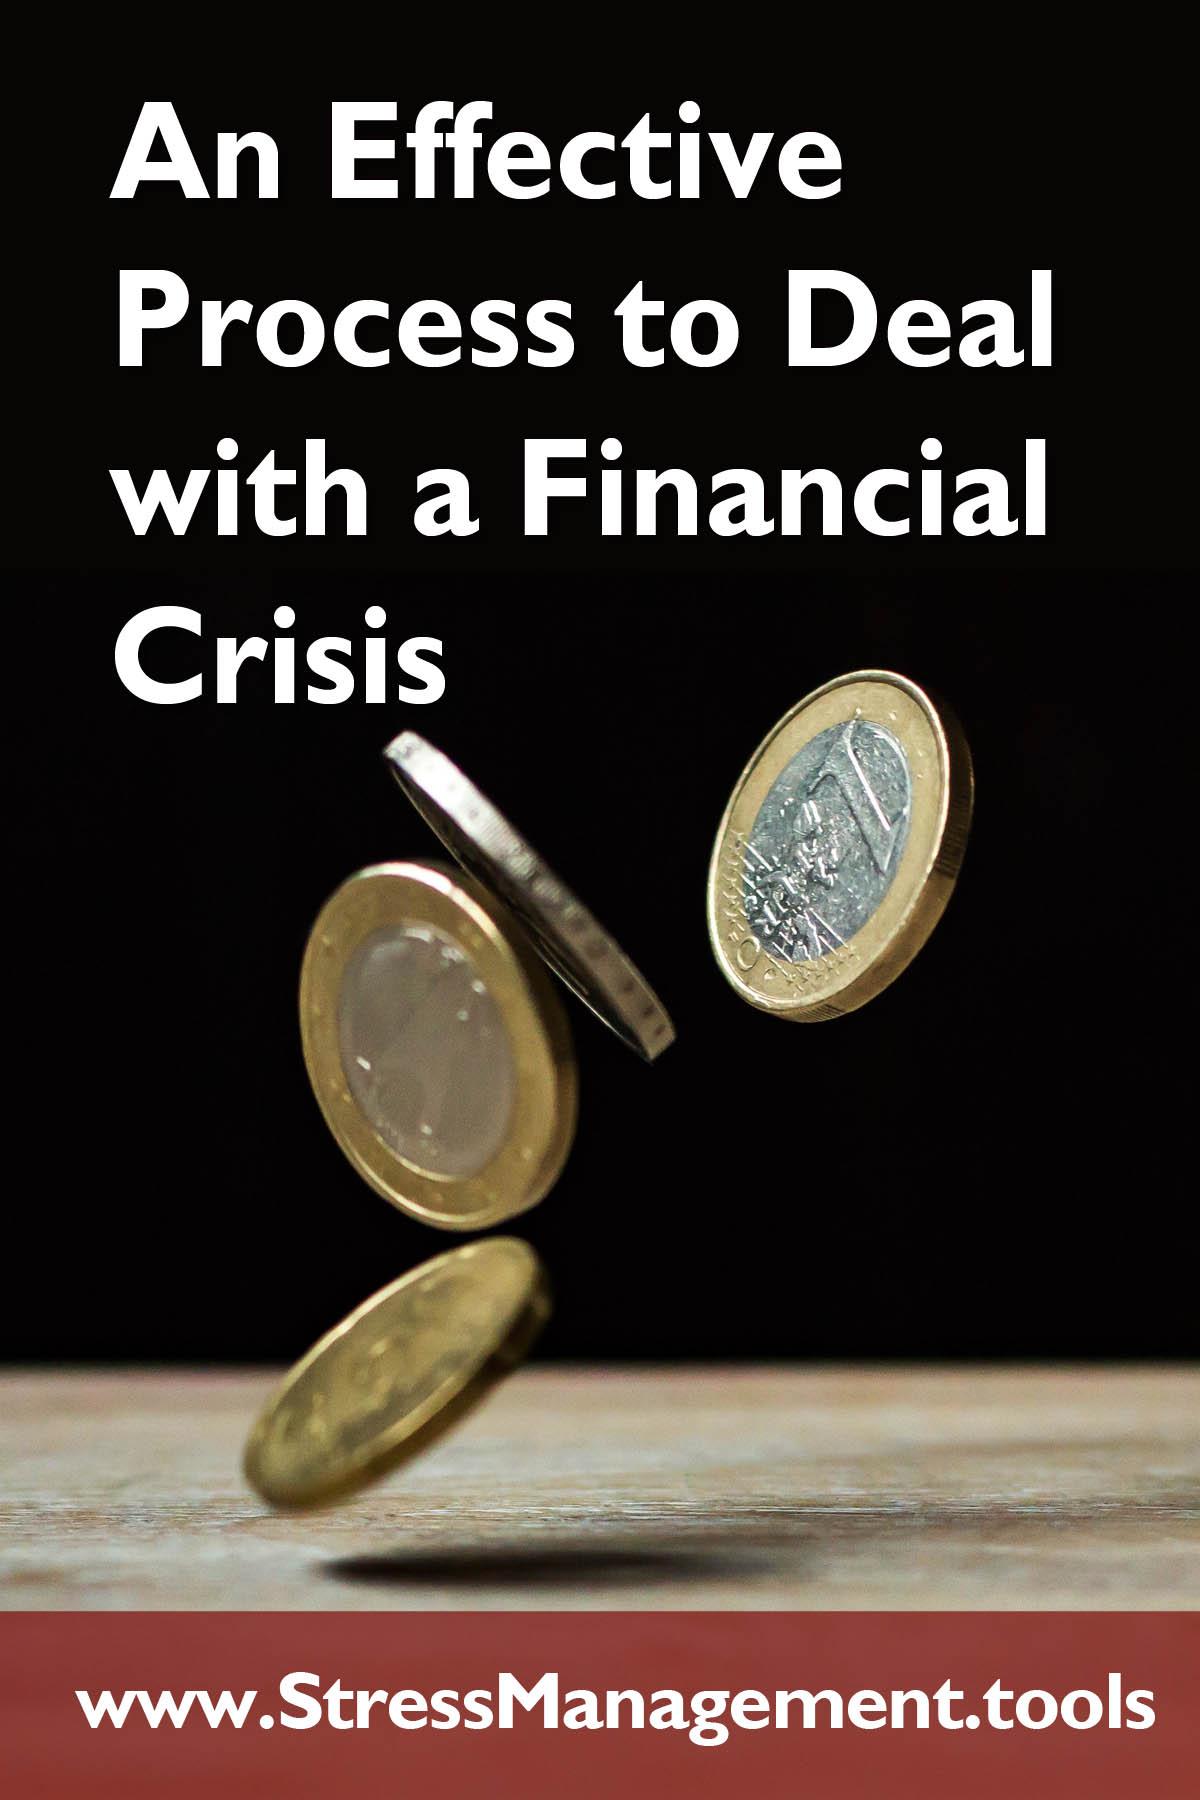 An Effective Process to Deal with a Financial Crisis